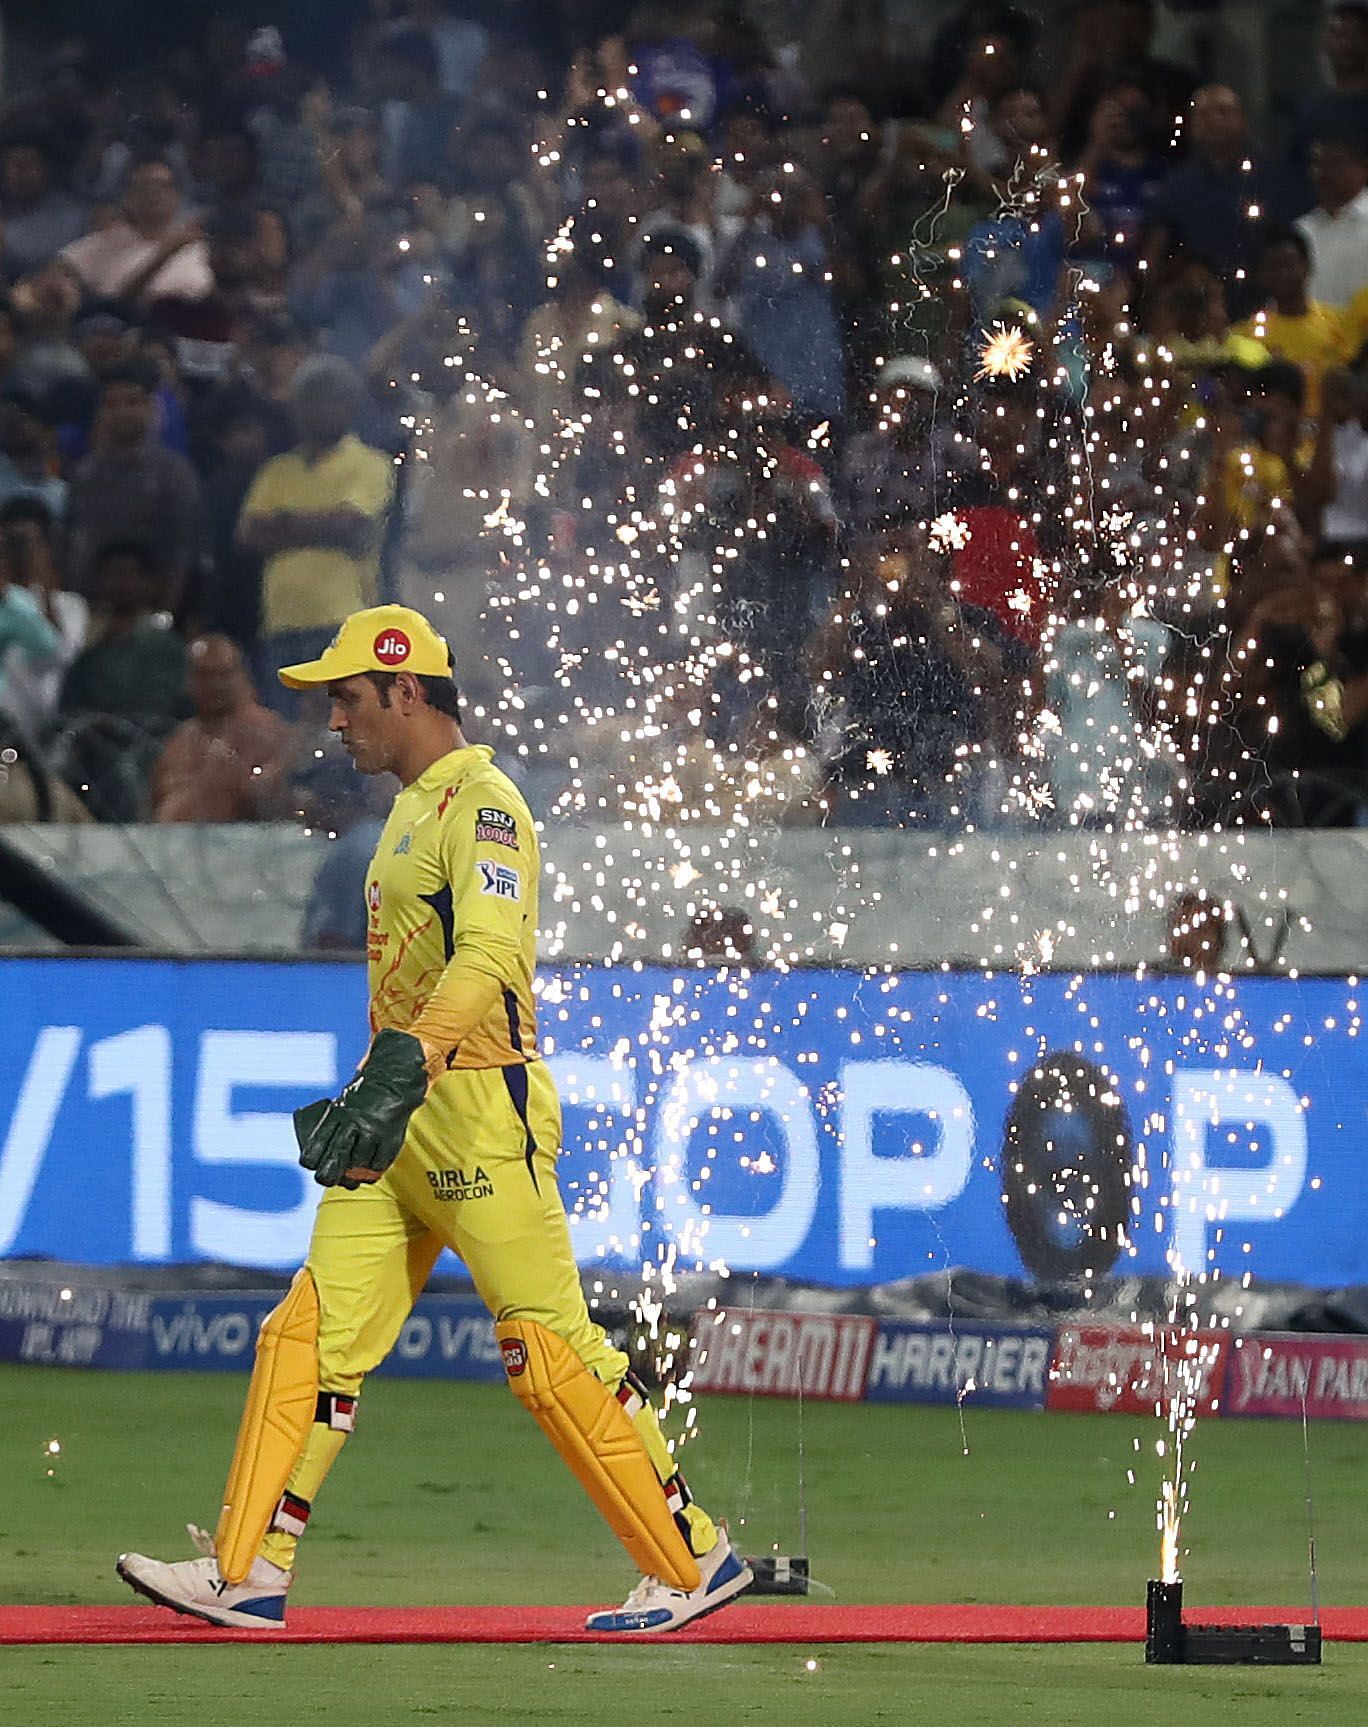 CSK are on track to become the 1st IPL team with the unicorn status